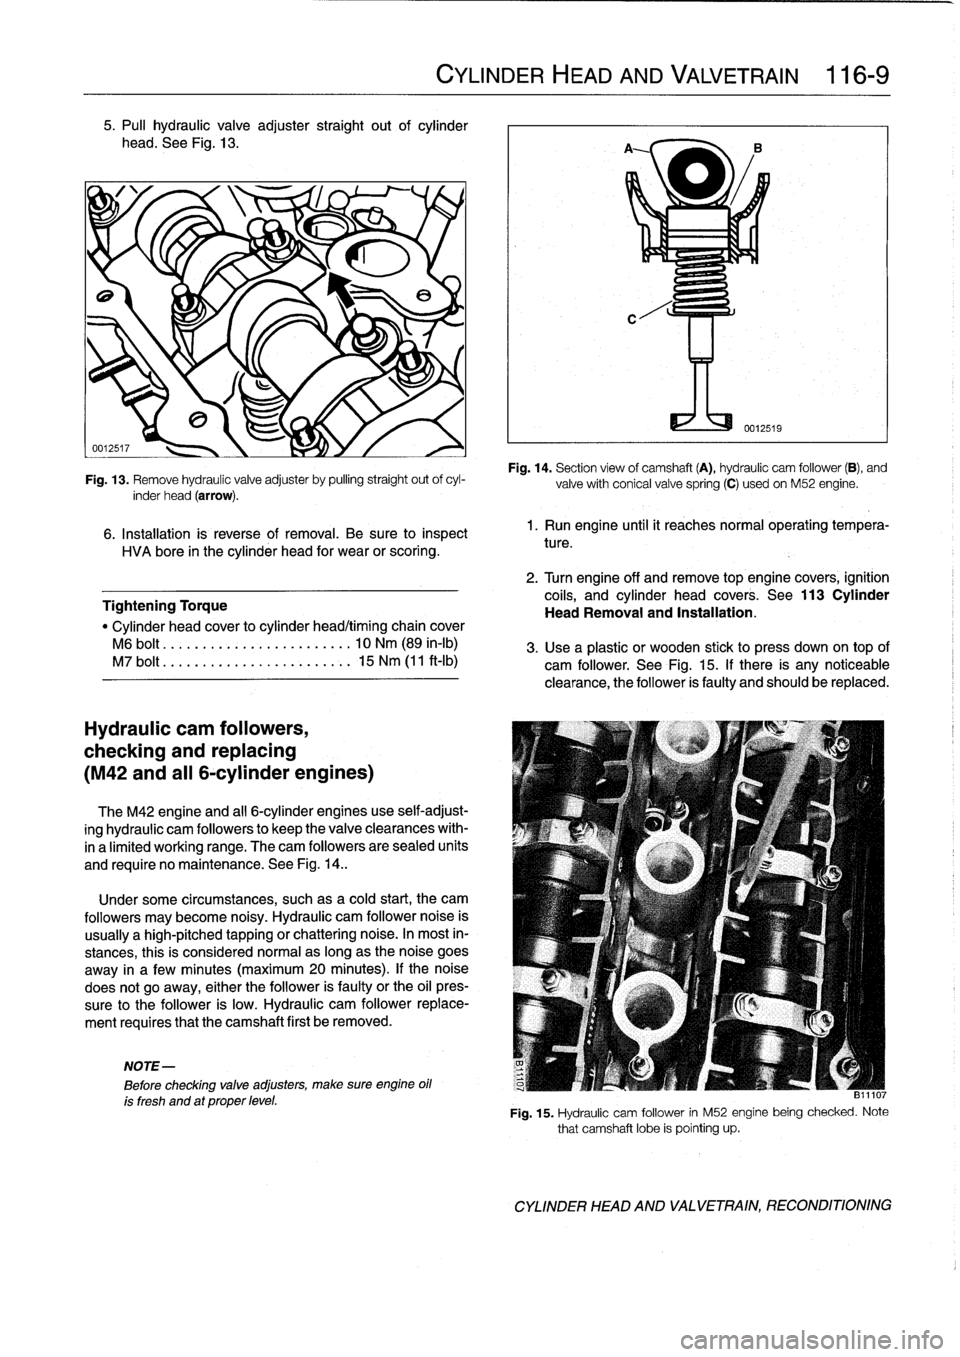 BMW M3 1993 E36 Owners Manual 5
.
Pull
hydraulic
valve
adjuster
straight
out
of
cylinder

head
.
See
Fig
.
13
.

Fig
.
13
.
Remove
hydraulic
valve
adjuster
by
pulling
straight
out
ofcyl-
inder
head
(arrow)
.

6
.
Installation
is
r